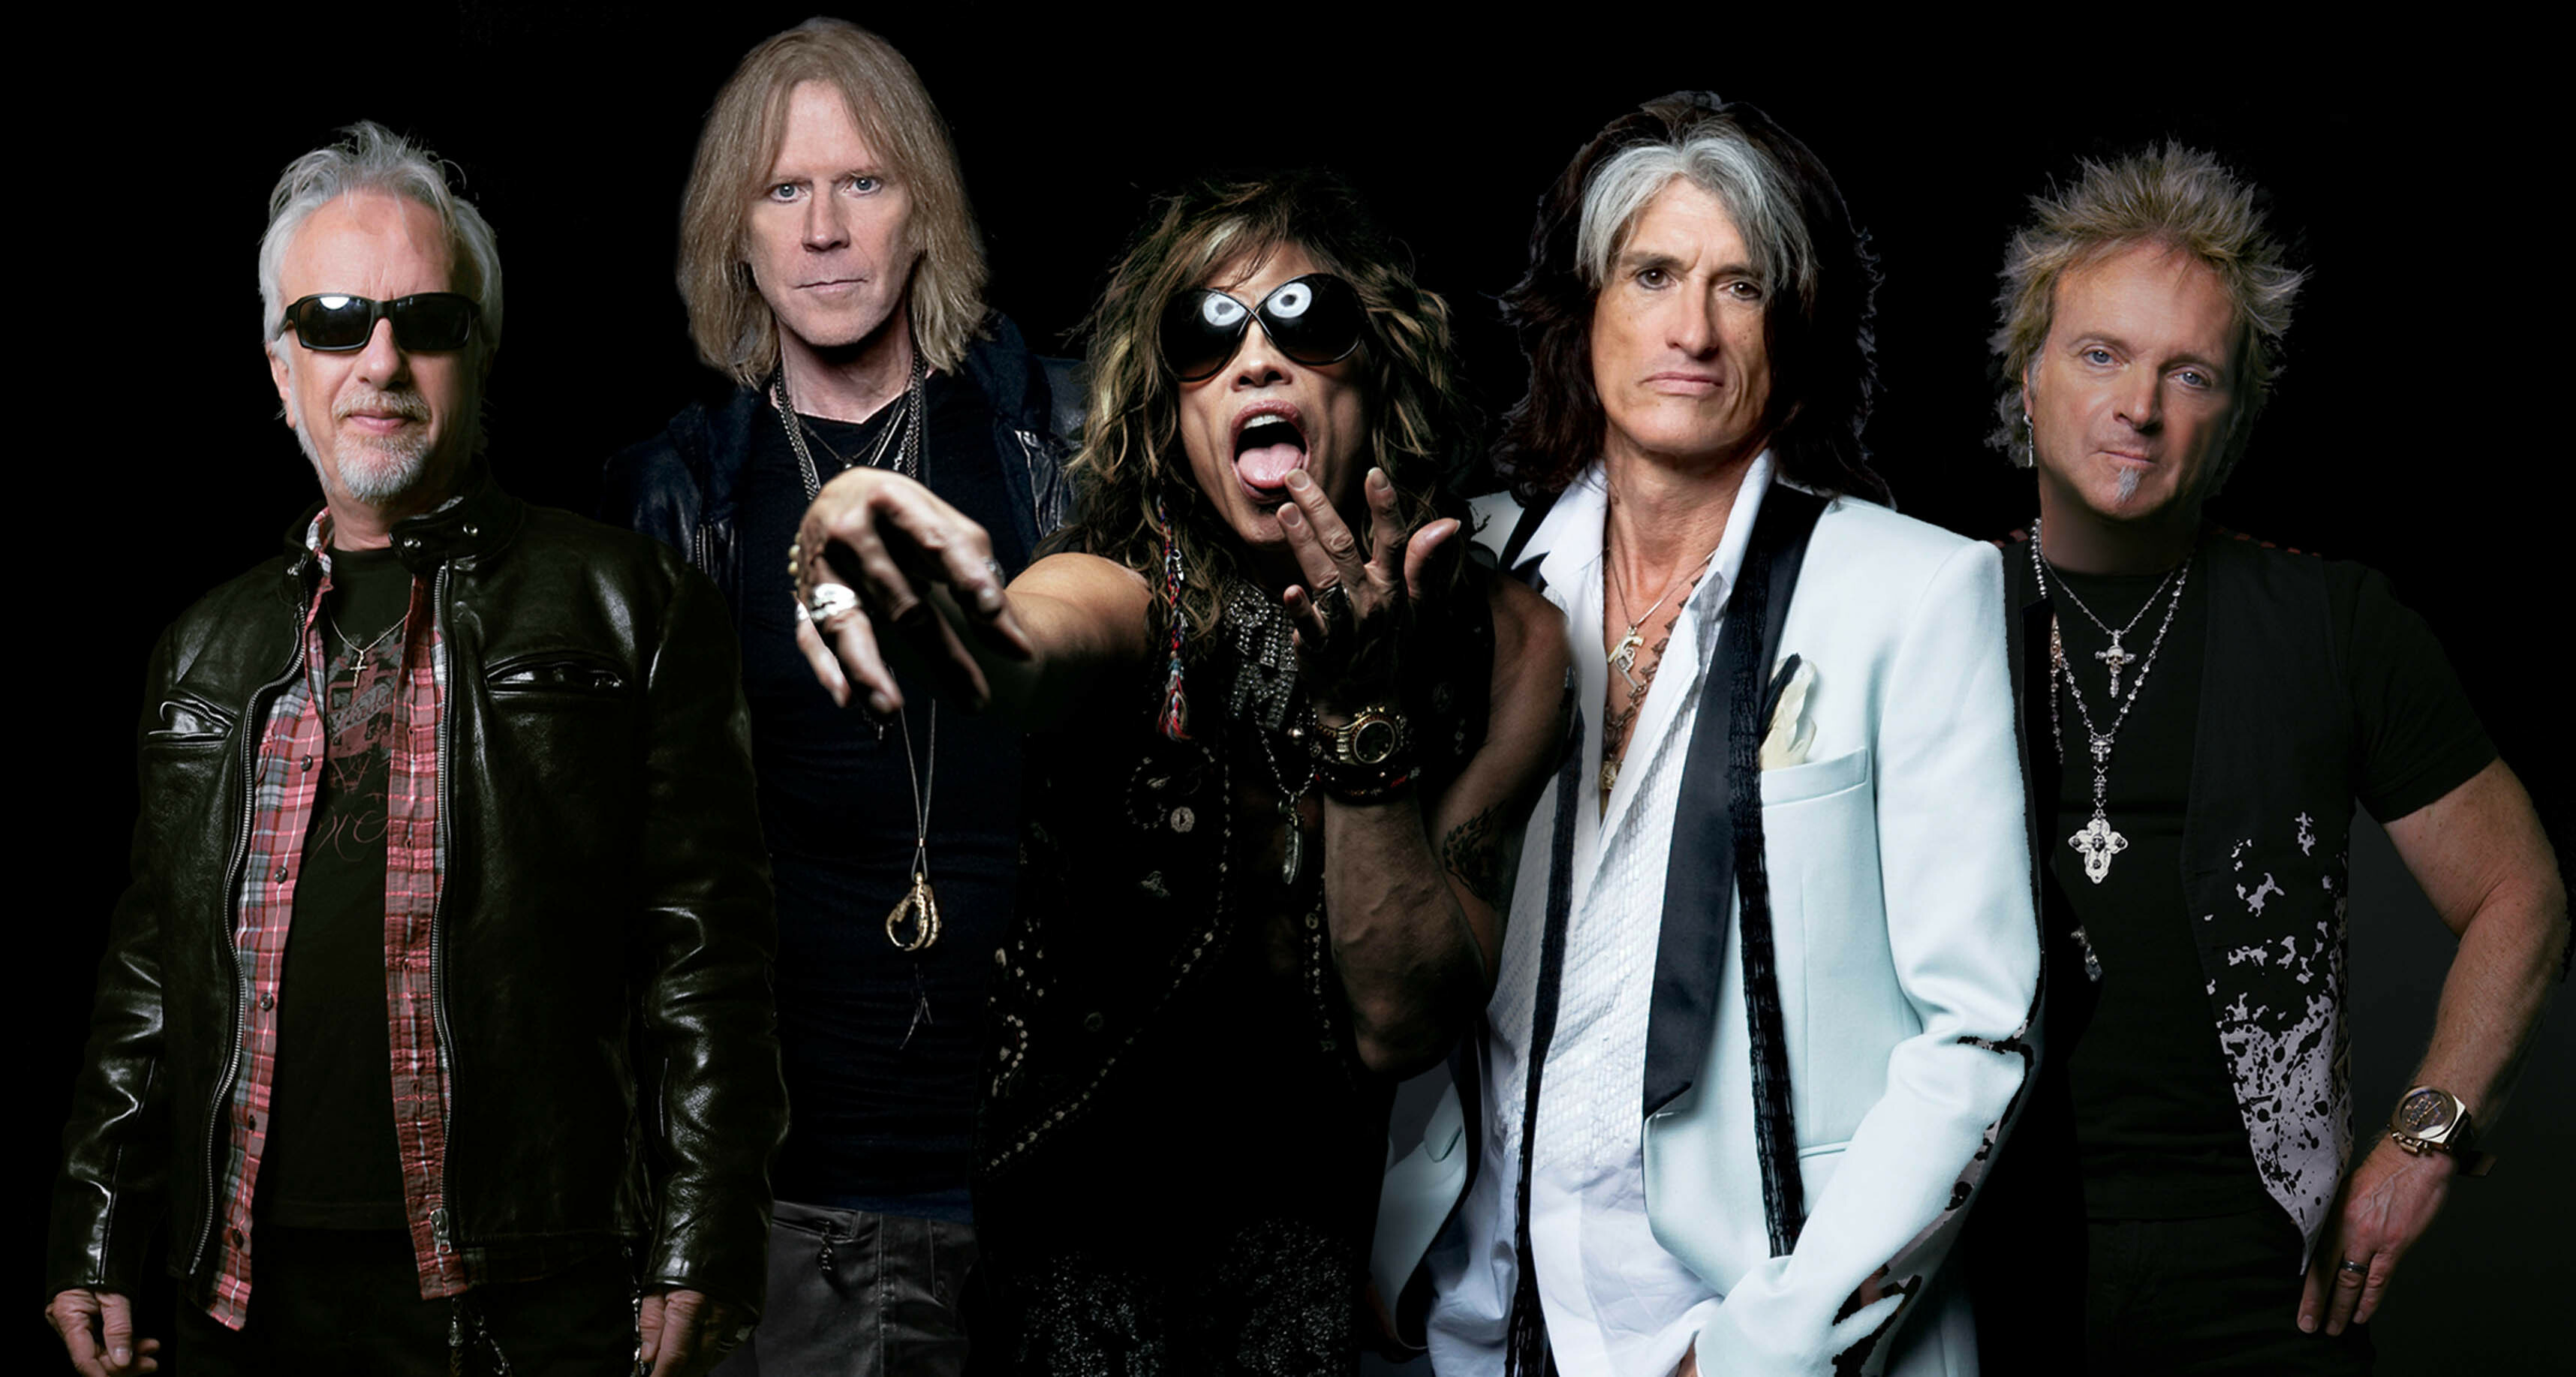 Aerosmith, band wallpapers, high quality images, fan favorites, 3440x1840 HD Desktop